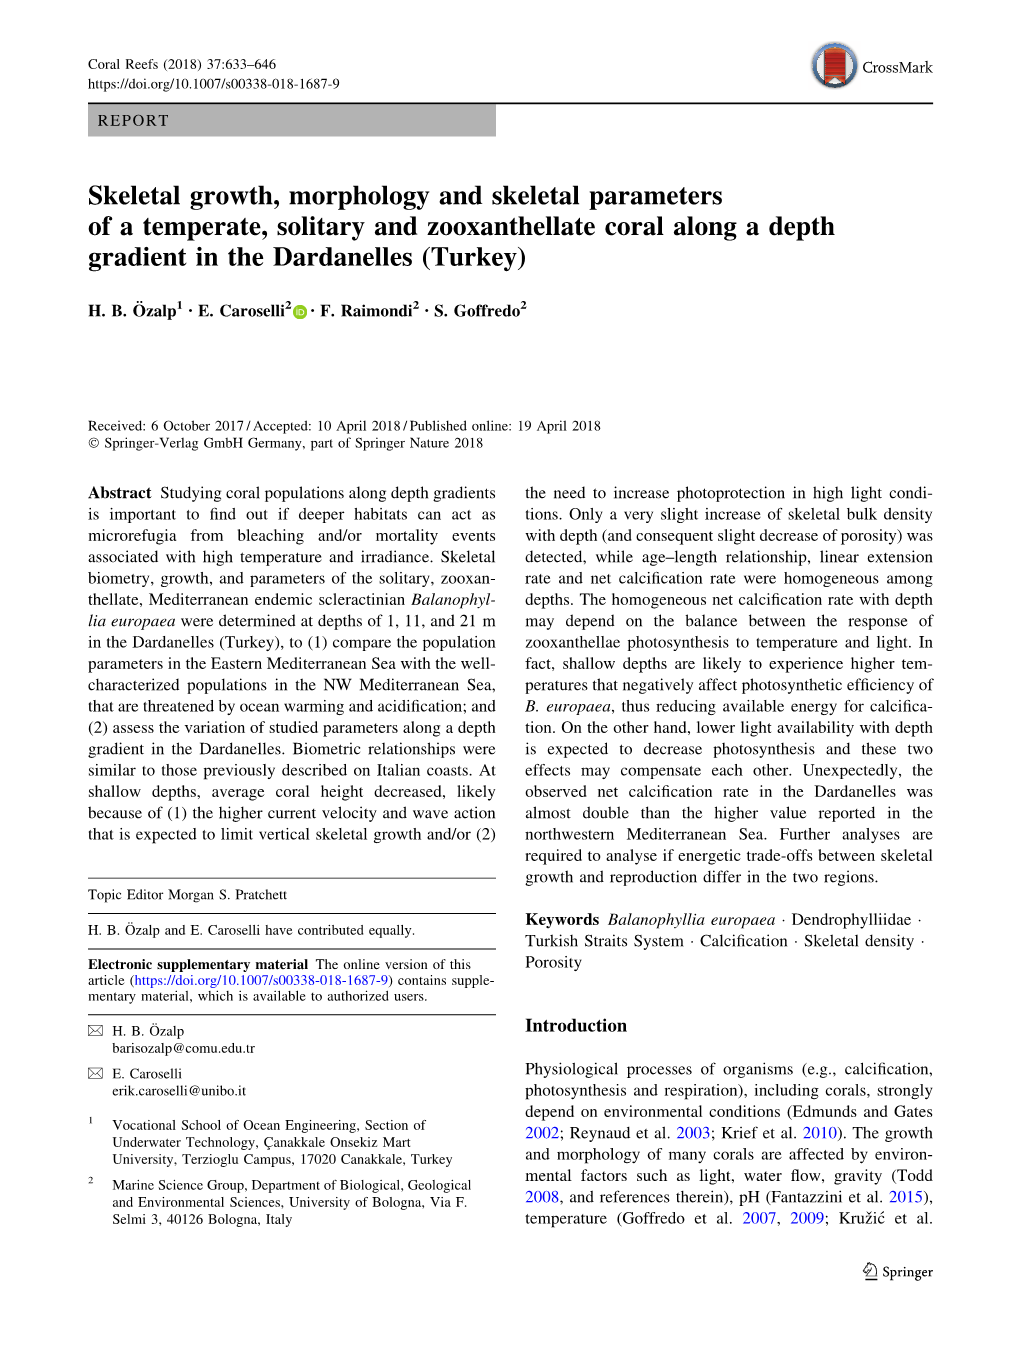 Skeletal Growth, Morphology and Skeletal Parameters of a Temperate, Solitary and Zooxanthellate Coral Along a Depth Gradient in the Dardanelles (Turkey)